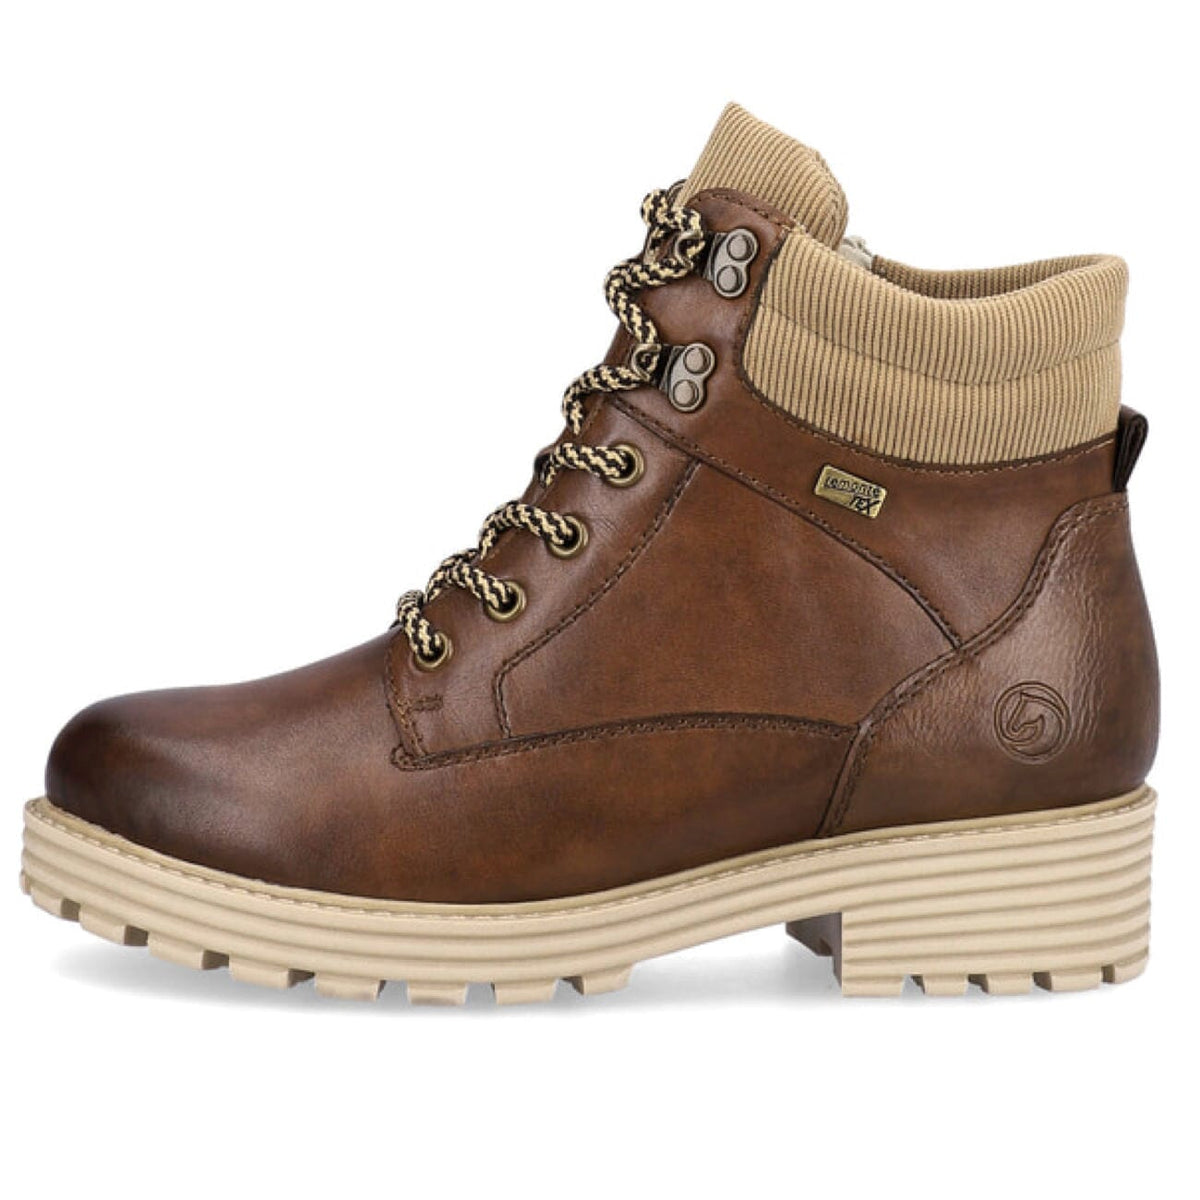 Remonte, DOW75-22, Boot, Leather, Chestnut Boots Remonte 